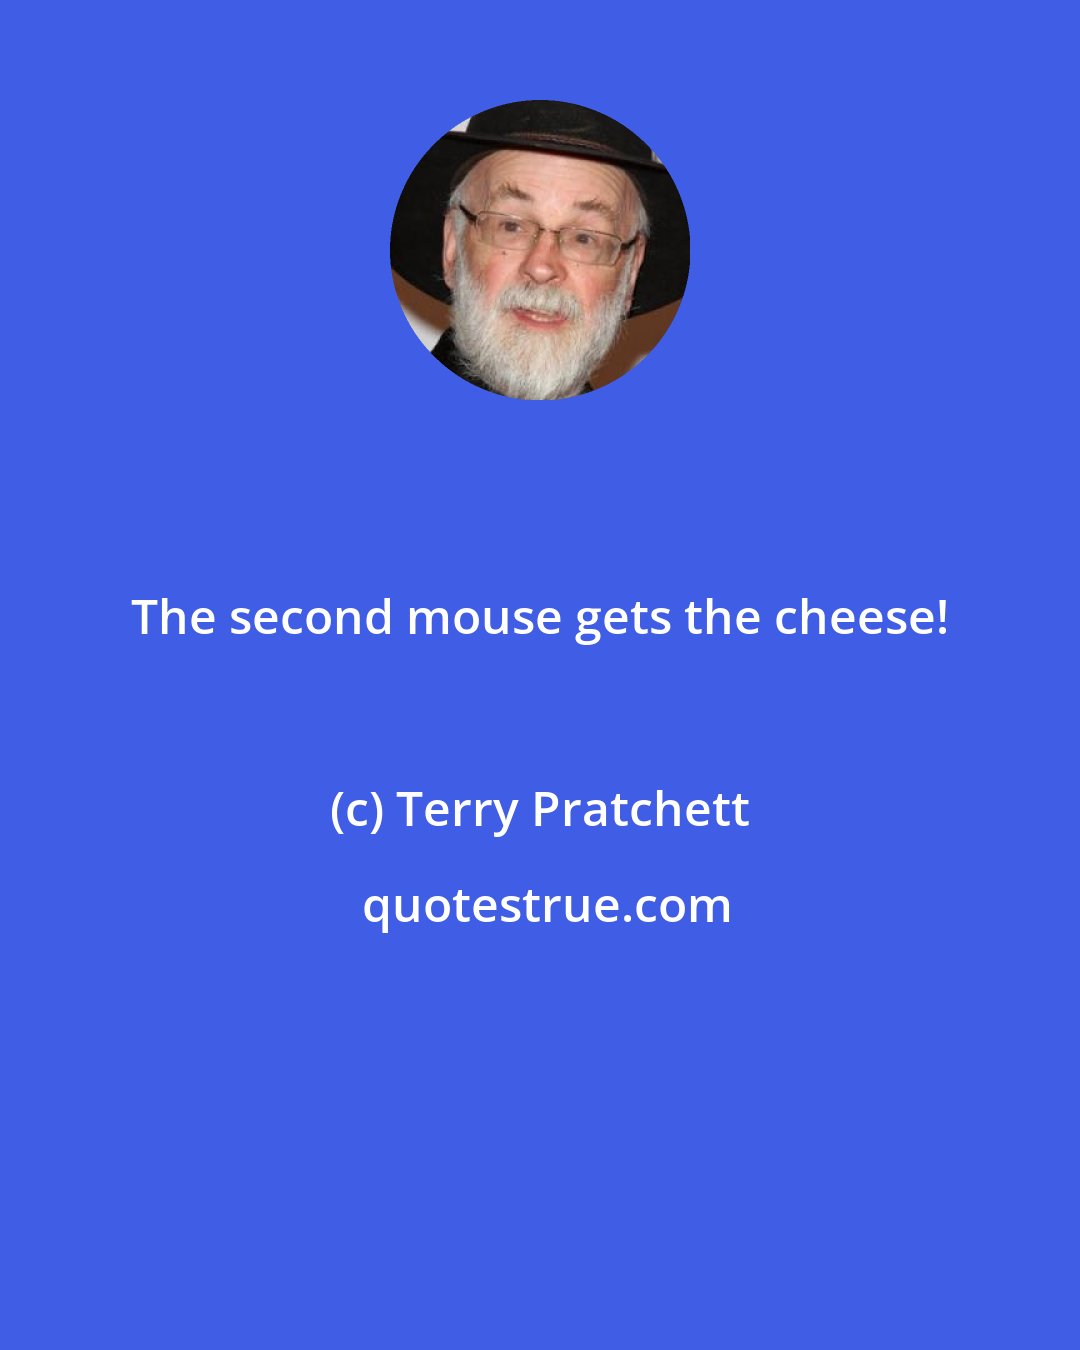 Terry Pratchett: The second mouse gets the cheese!